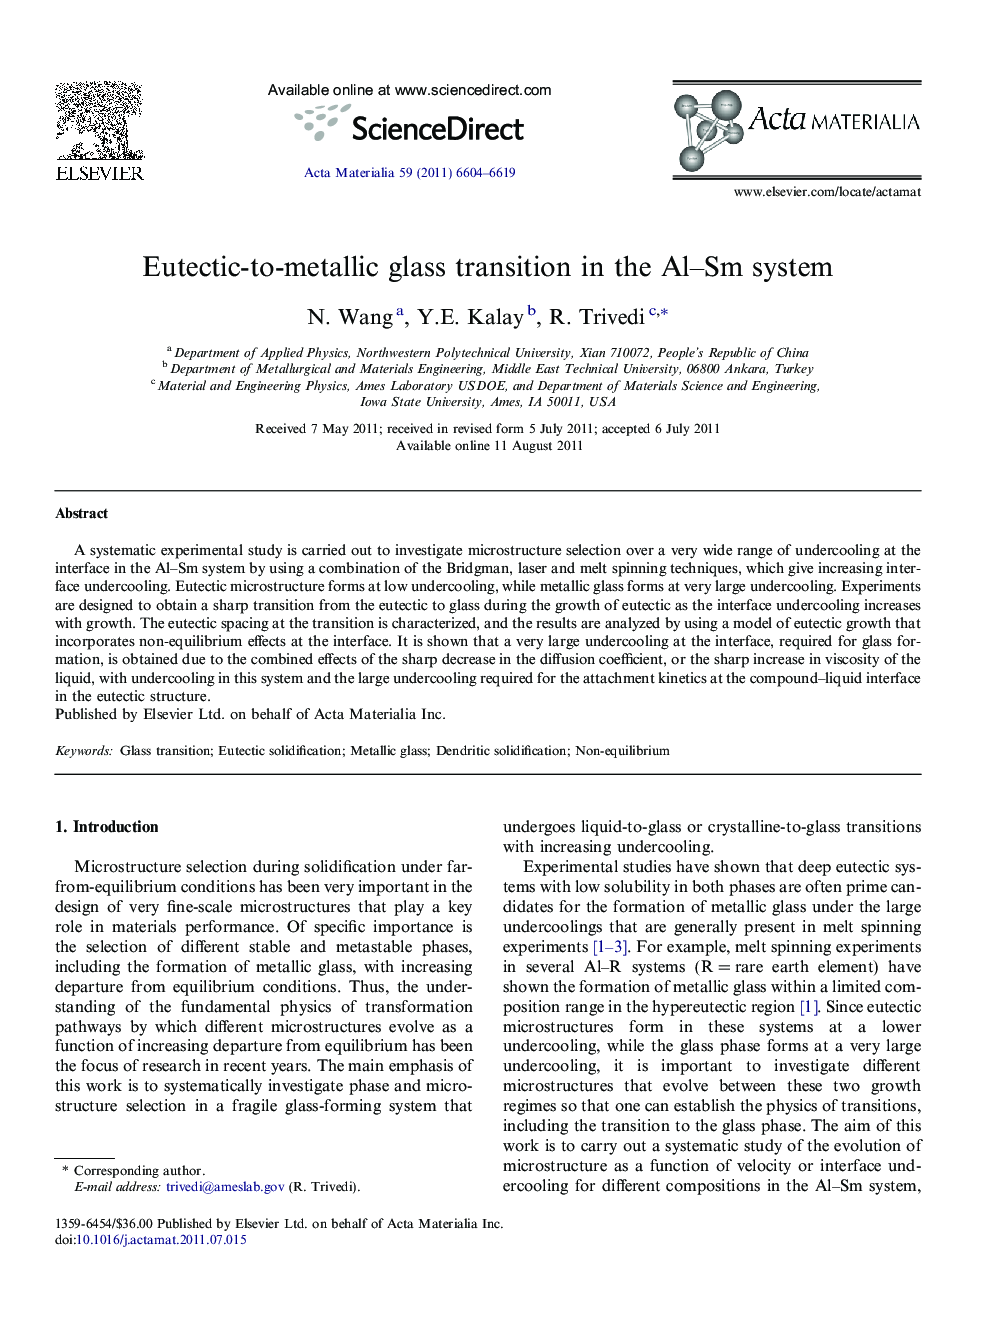 Eutectic-to-metallic glass transition in the Al–Sm system